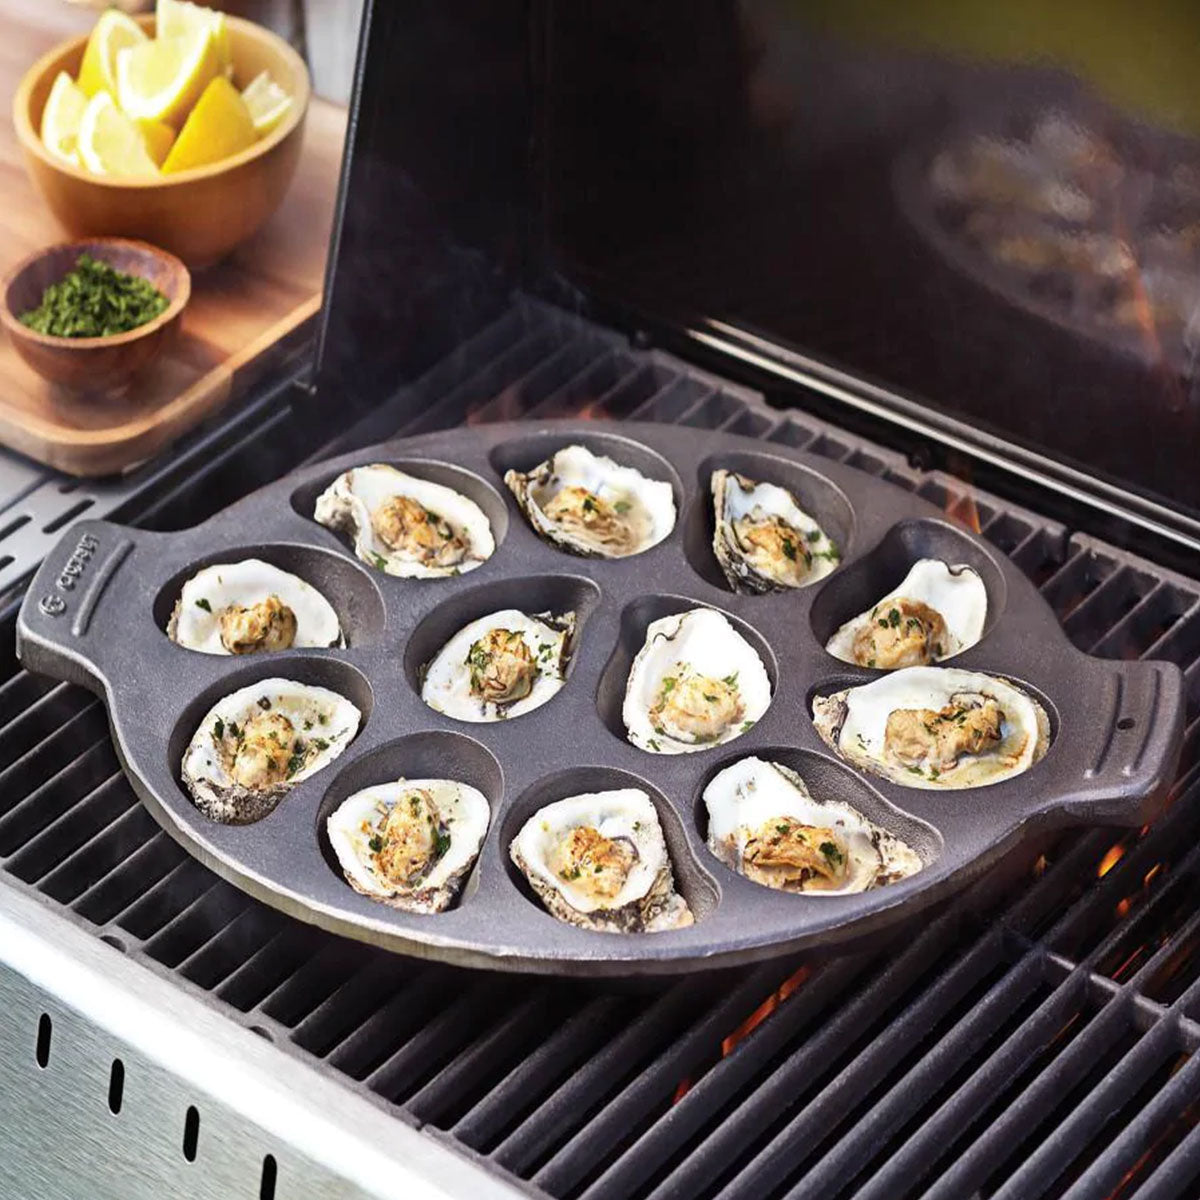 Outset Oyster Grill Pan 